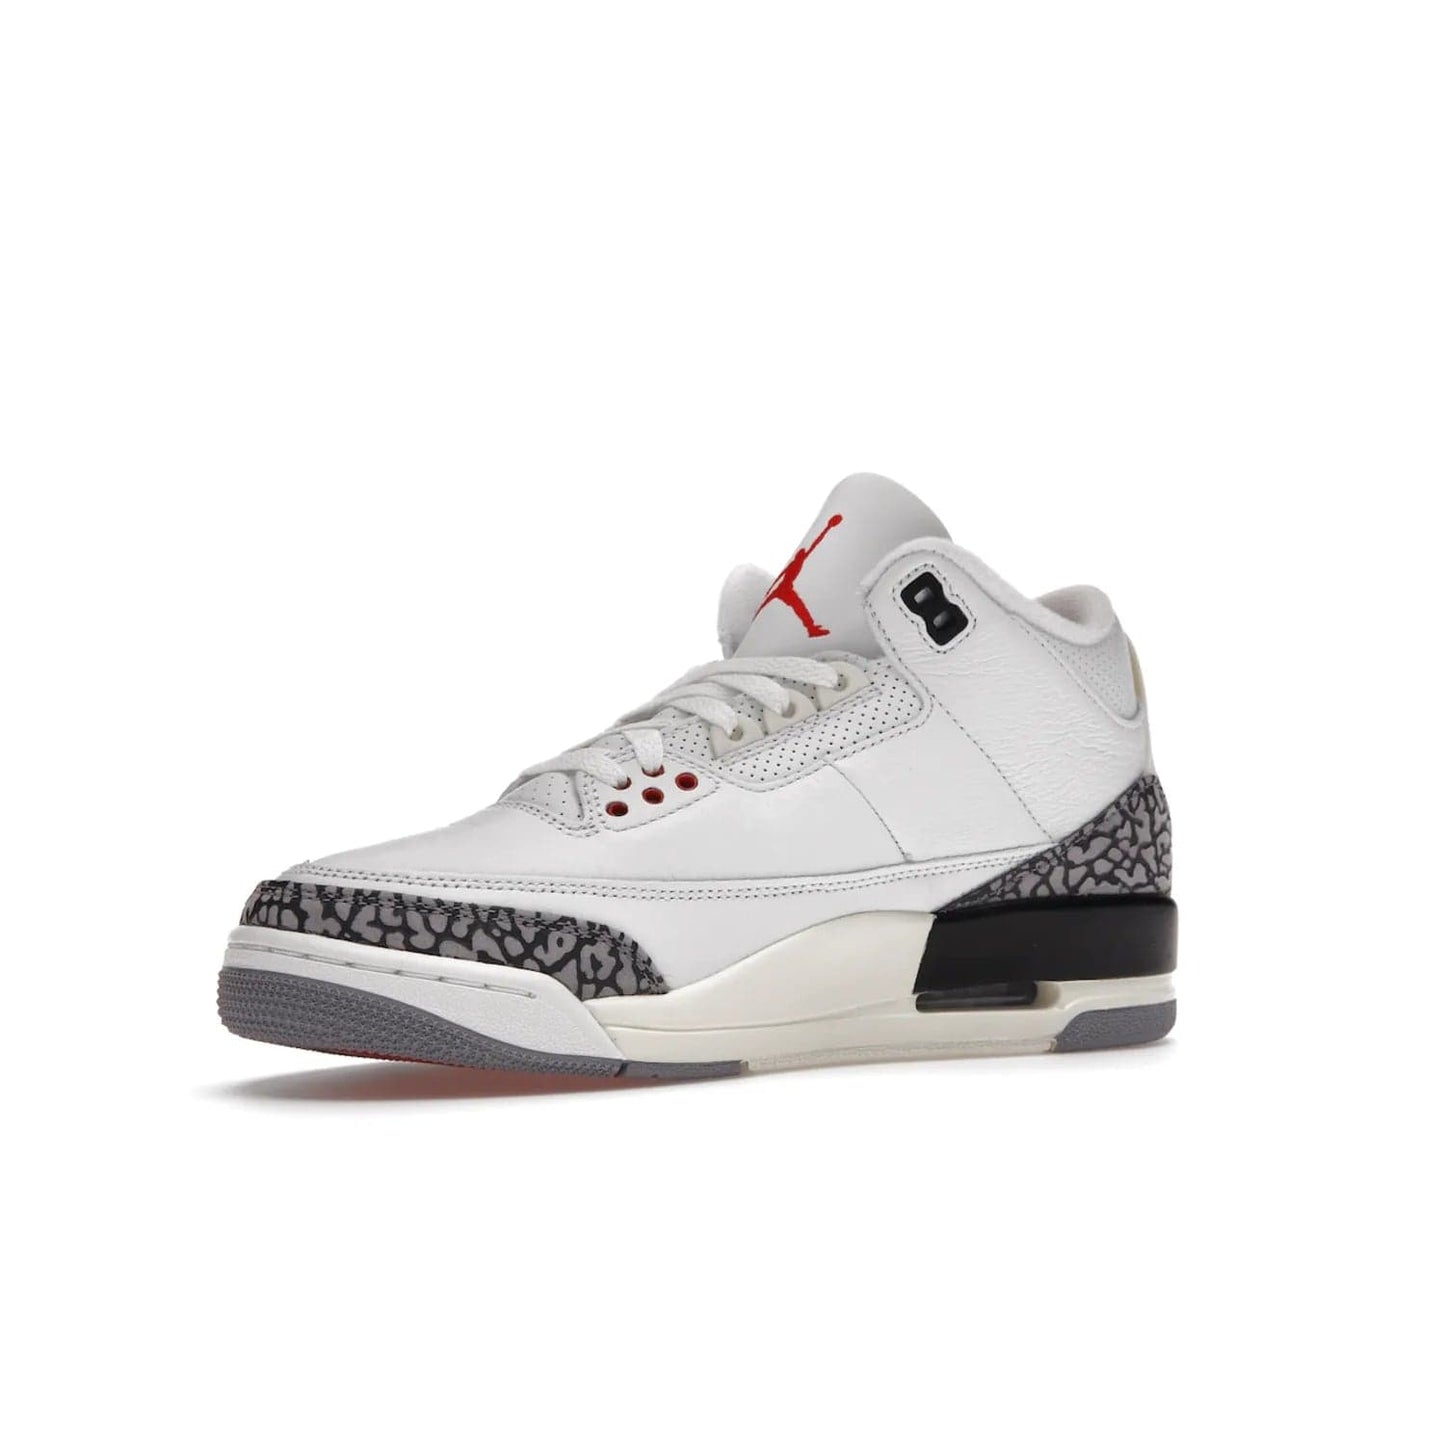 Jordan 3 Retro White Cement Reimagined - Image 16 - Only at www.BallersClubKickz.com - The Reimagined Air Jordan 3 Retro in a Summit White/Fire Red/Black/Cement Grey colorway is launching on March 11, 2023. Featuring a white leather upper, off-white midsoles and heel tabs, this vintage-look sneaker is a must-have.